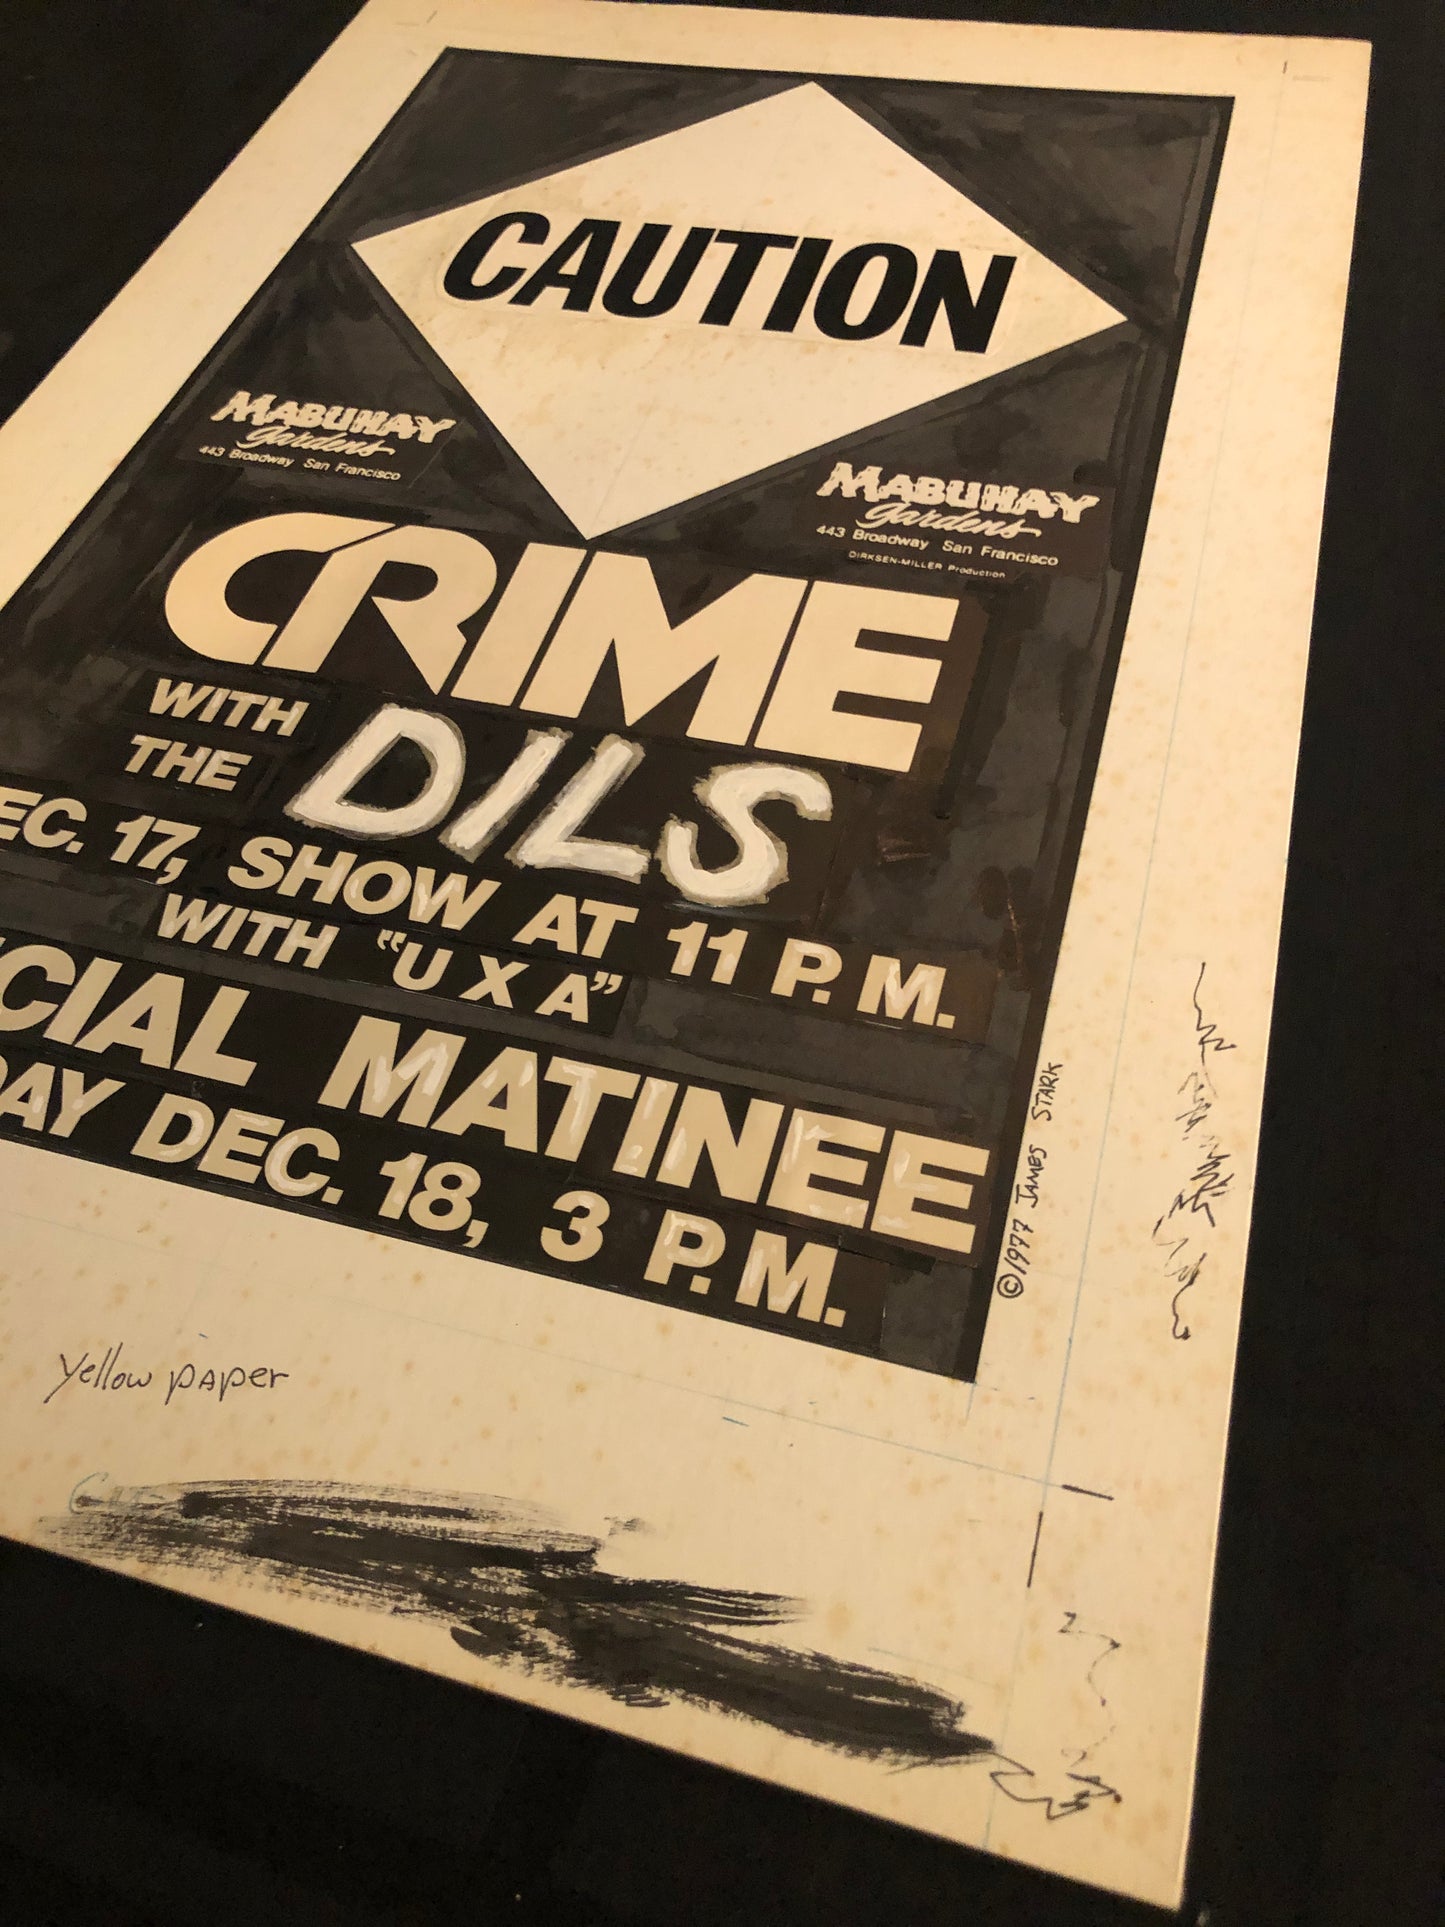 James Stark "CRIME with The Dils" Original Layout